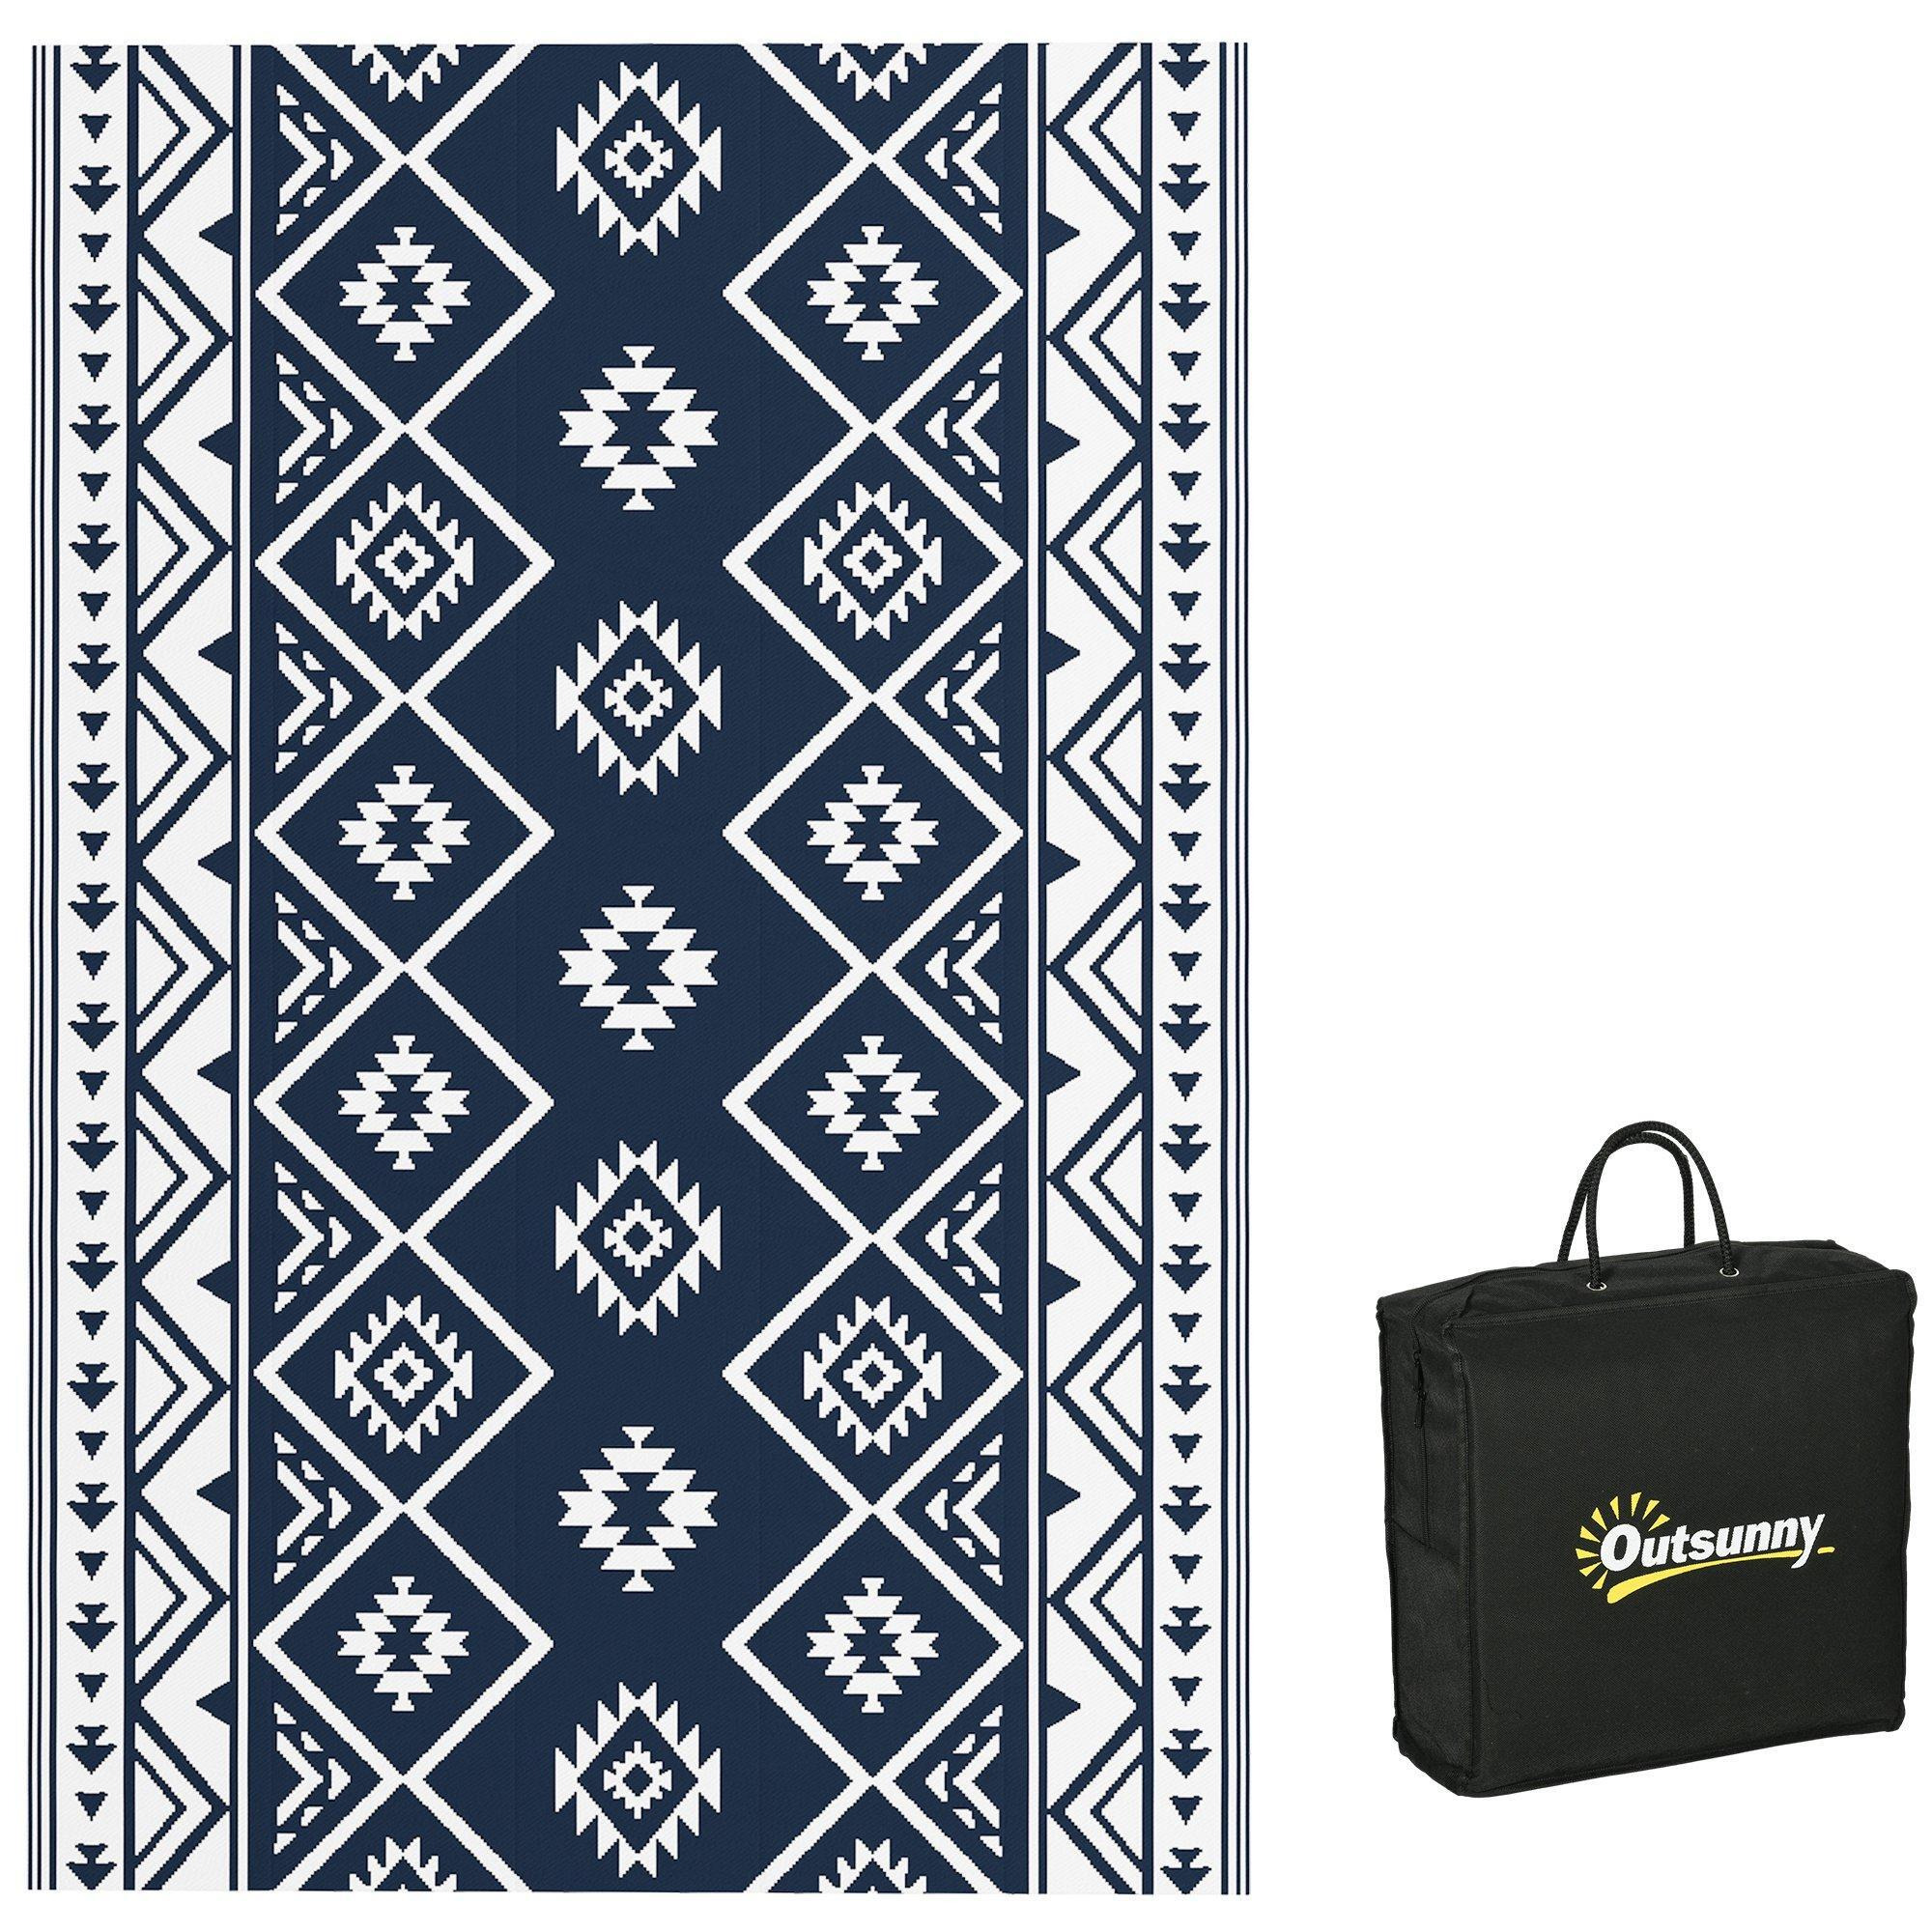 Reversible Outdoor Rug with Carry Bag for RV Camping Beach, 182 x 274cm - image 1